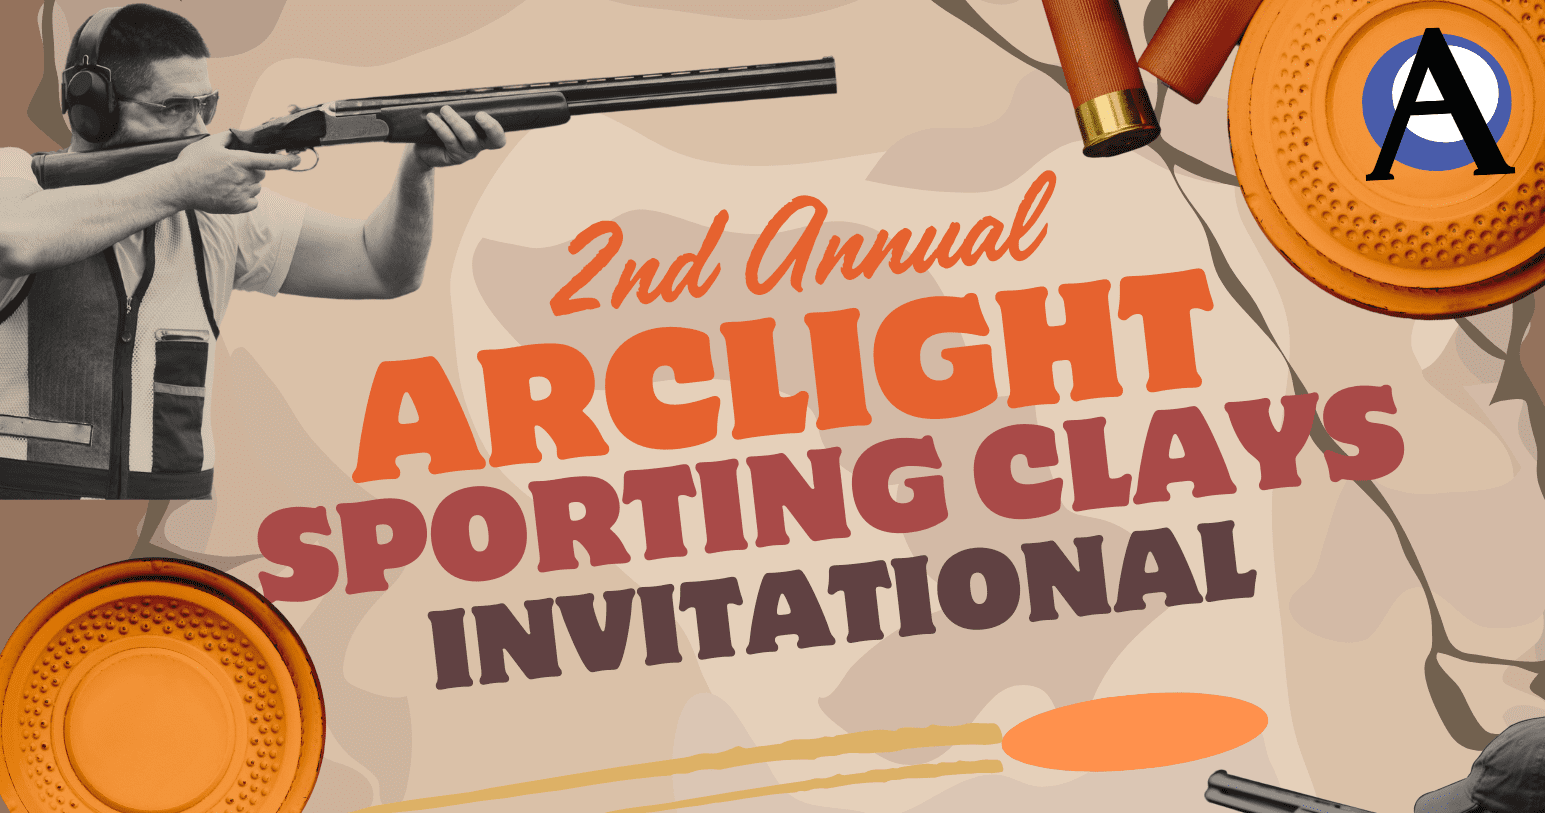 2nd Annual Arclight sporting clays invitational